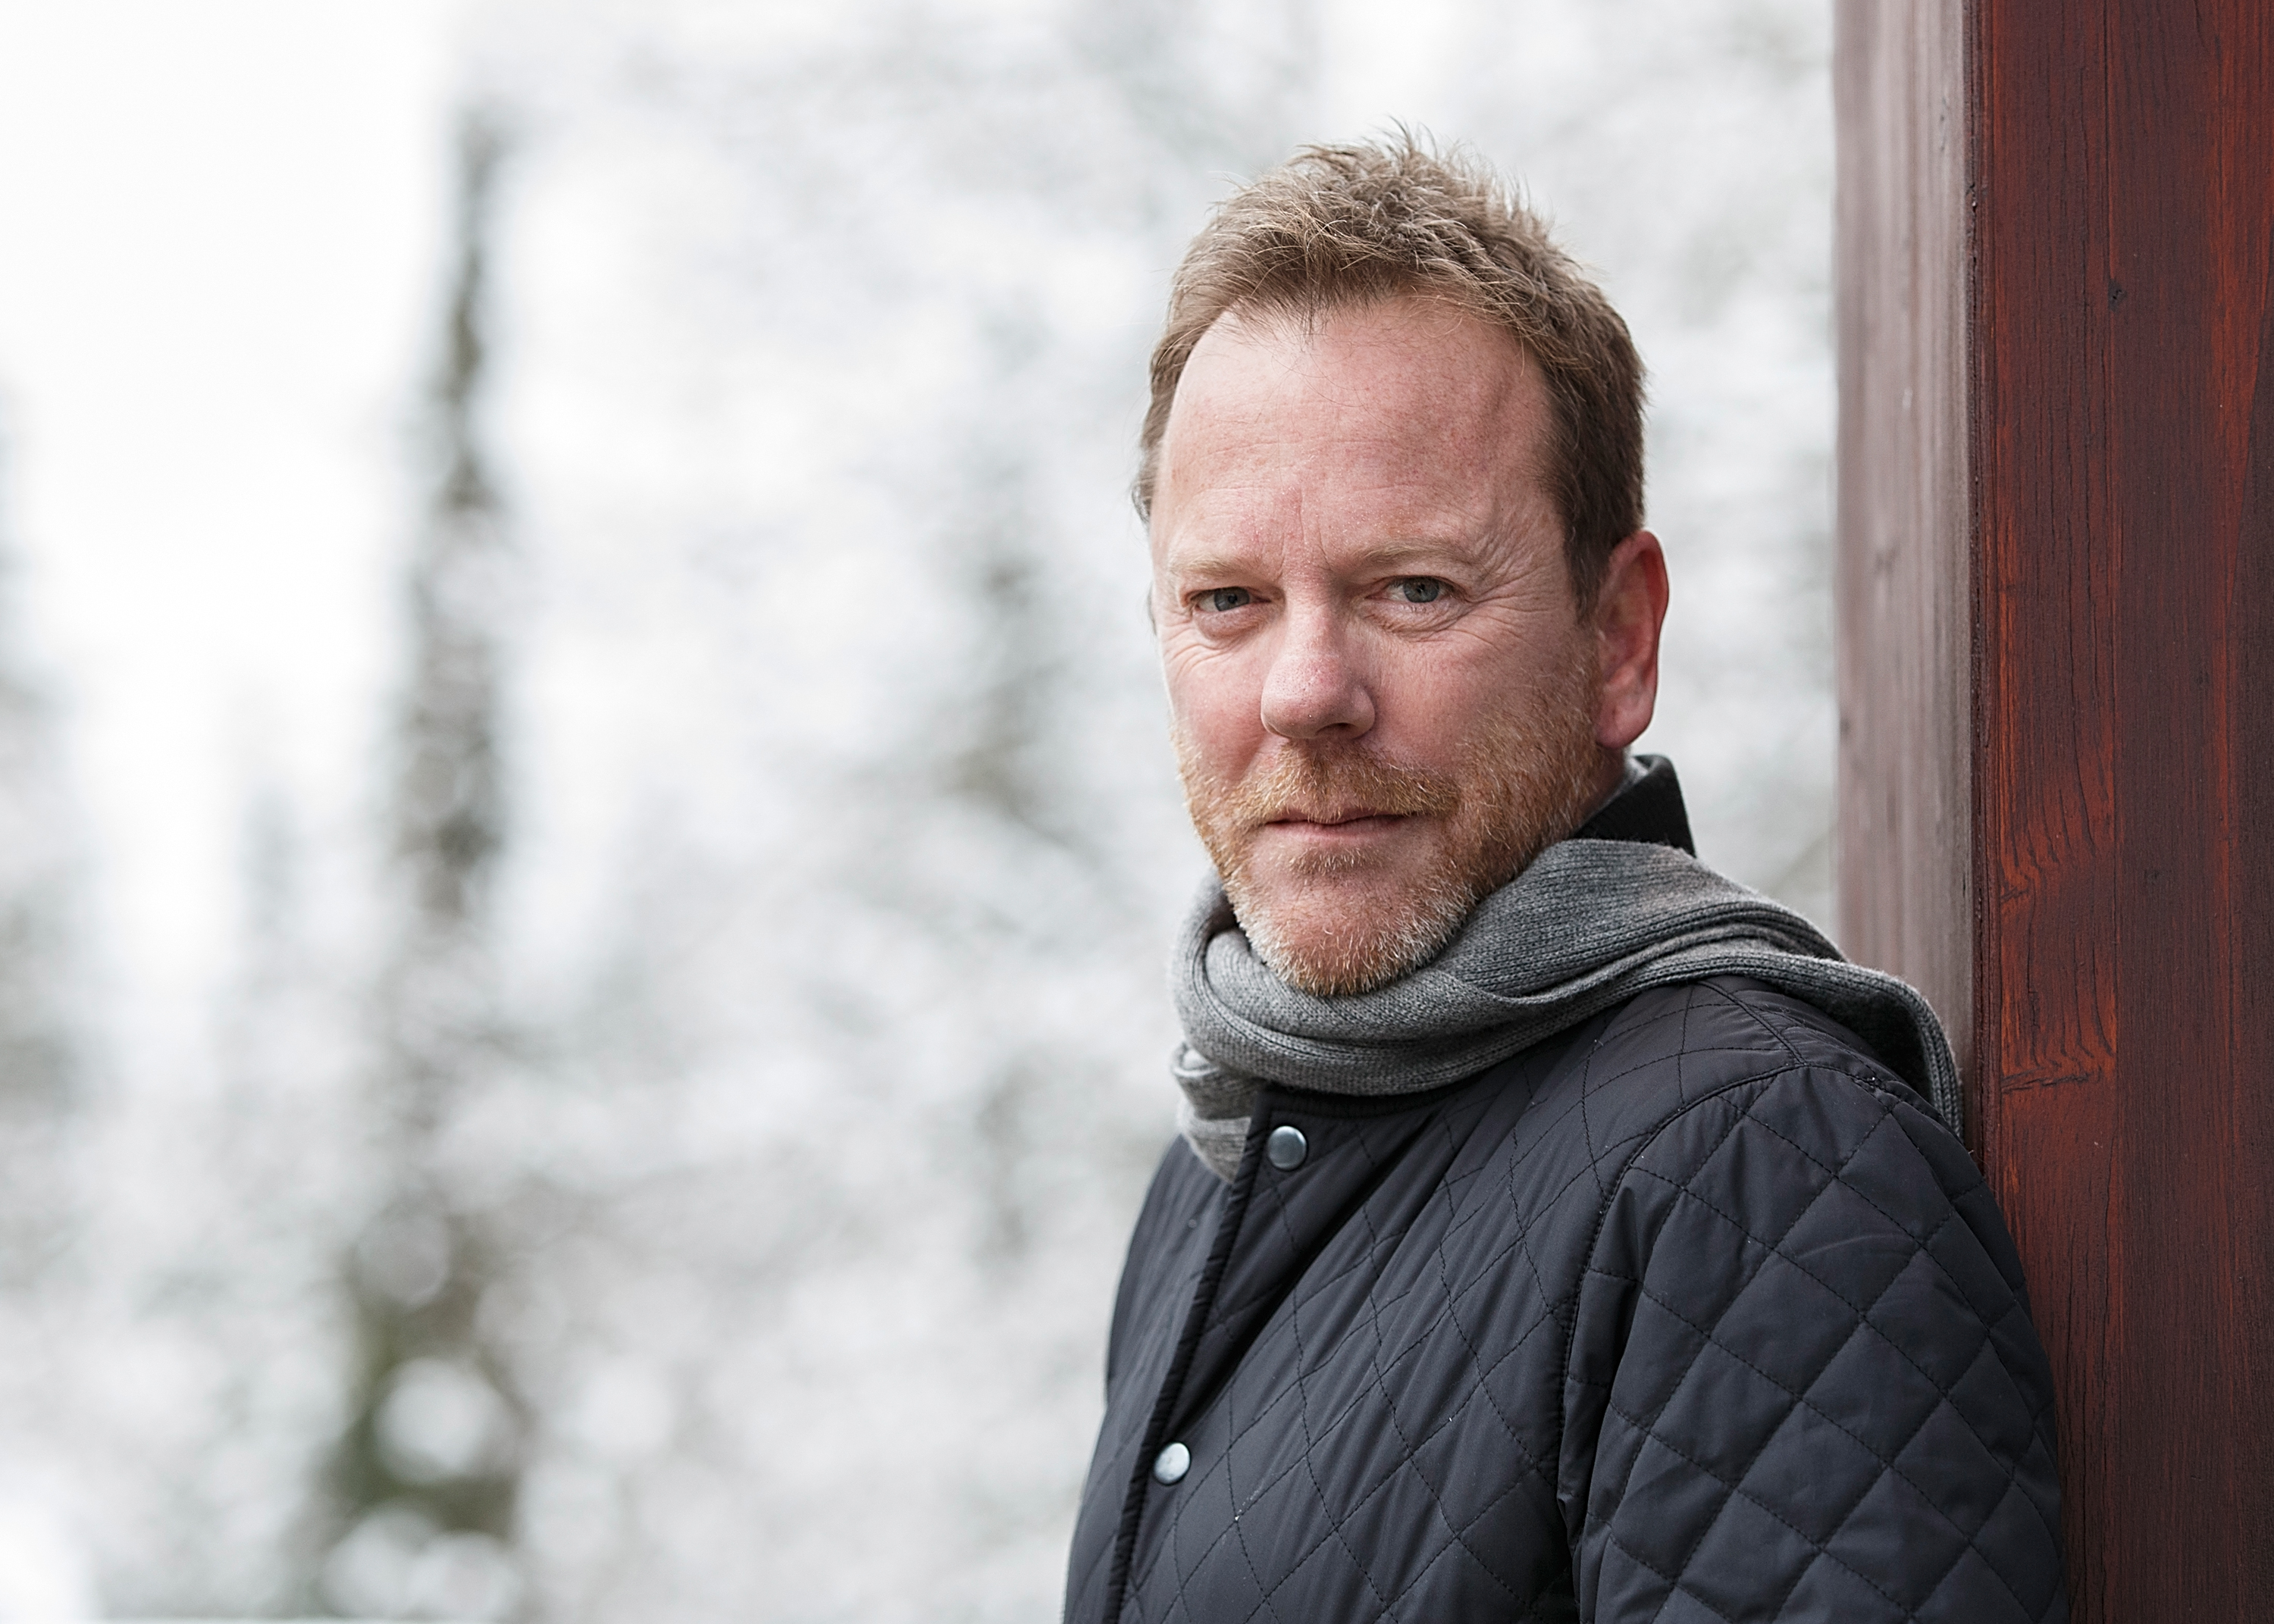 Actor Kiefer Sutherland poses for a portrait in Whistler Village during the 15th Annual Film Festival on Dec. 6, 2015 in Whistler, Canada. (Andrew Chin—Getty Images)